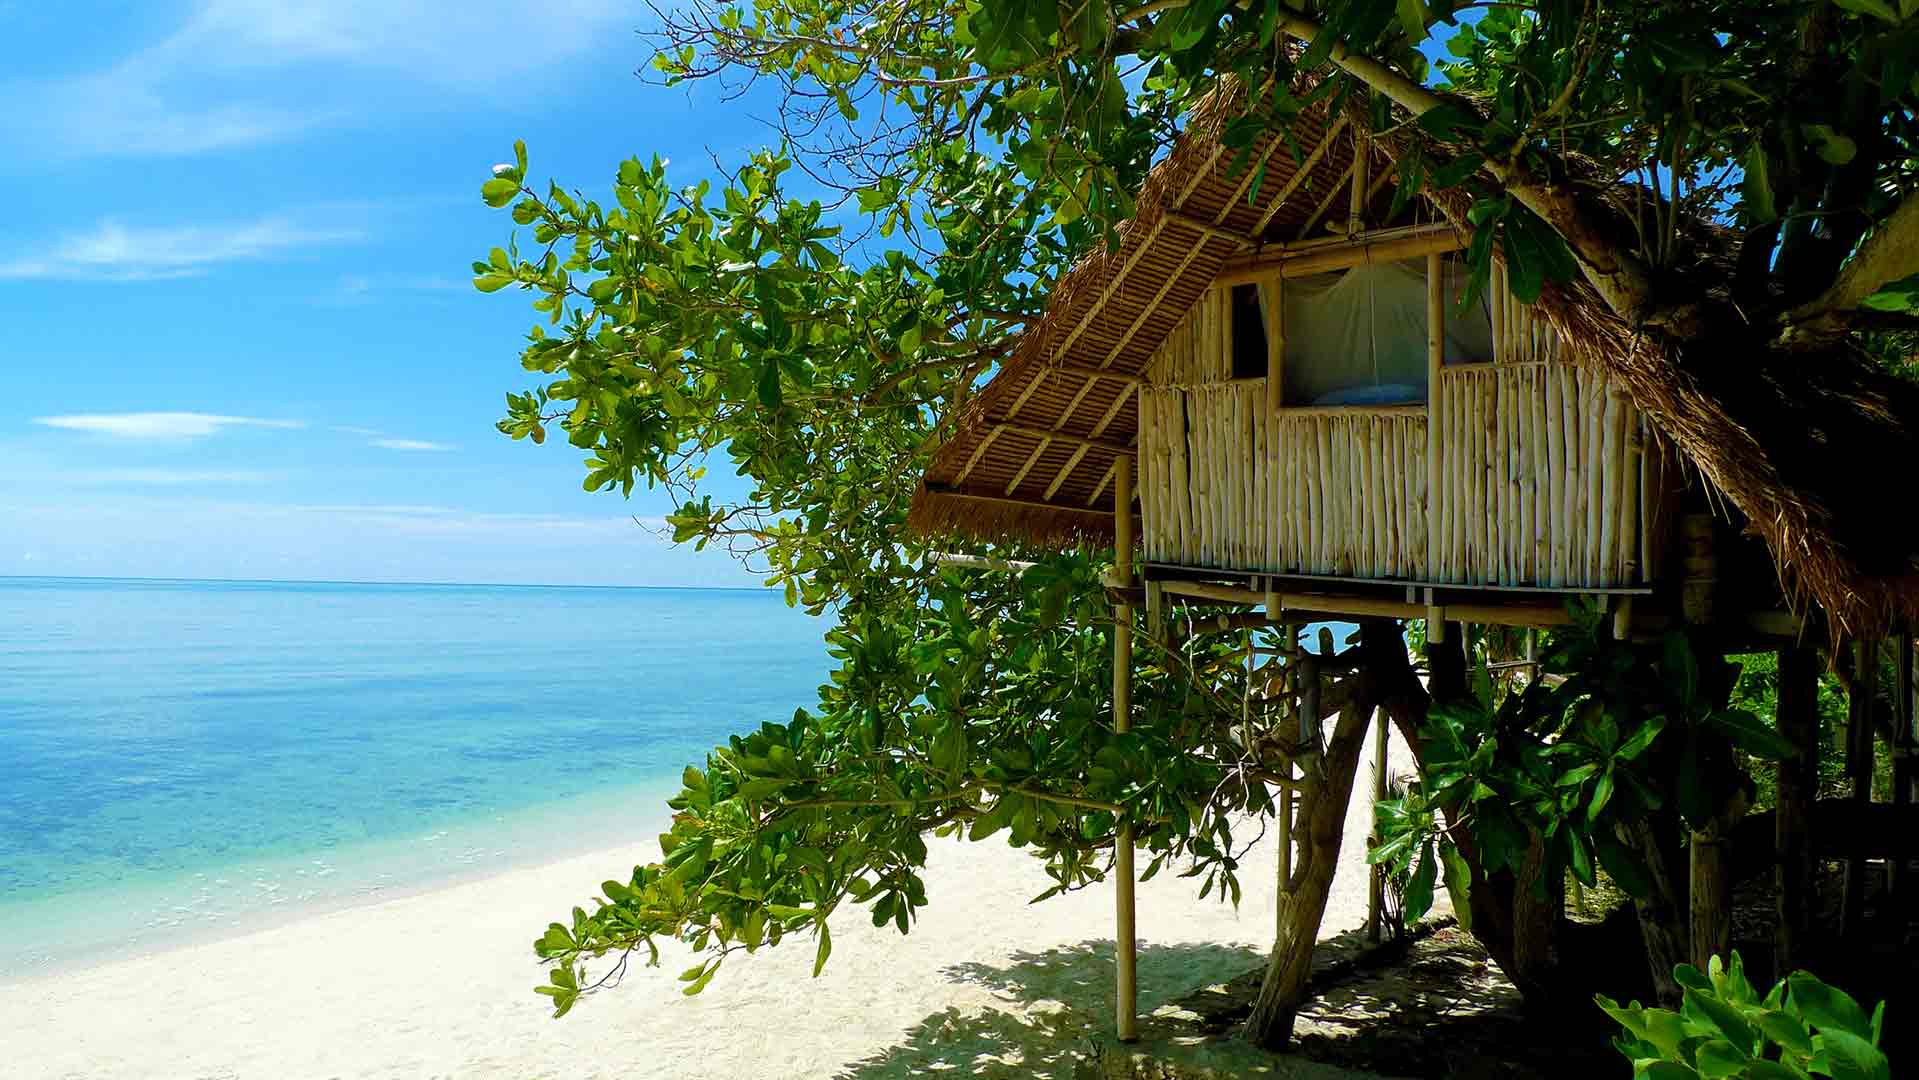 A tree house on a secluded beach